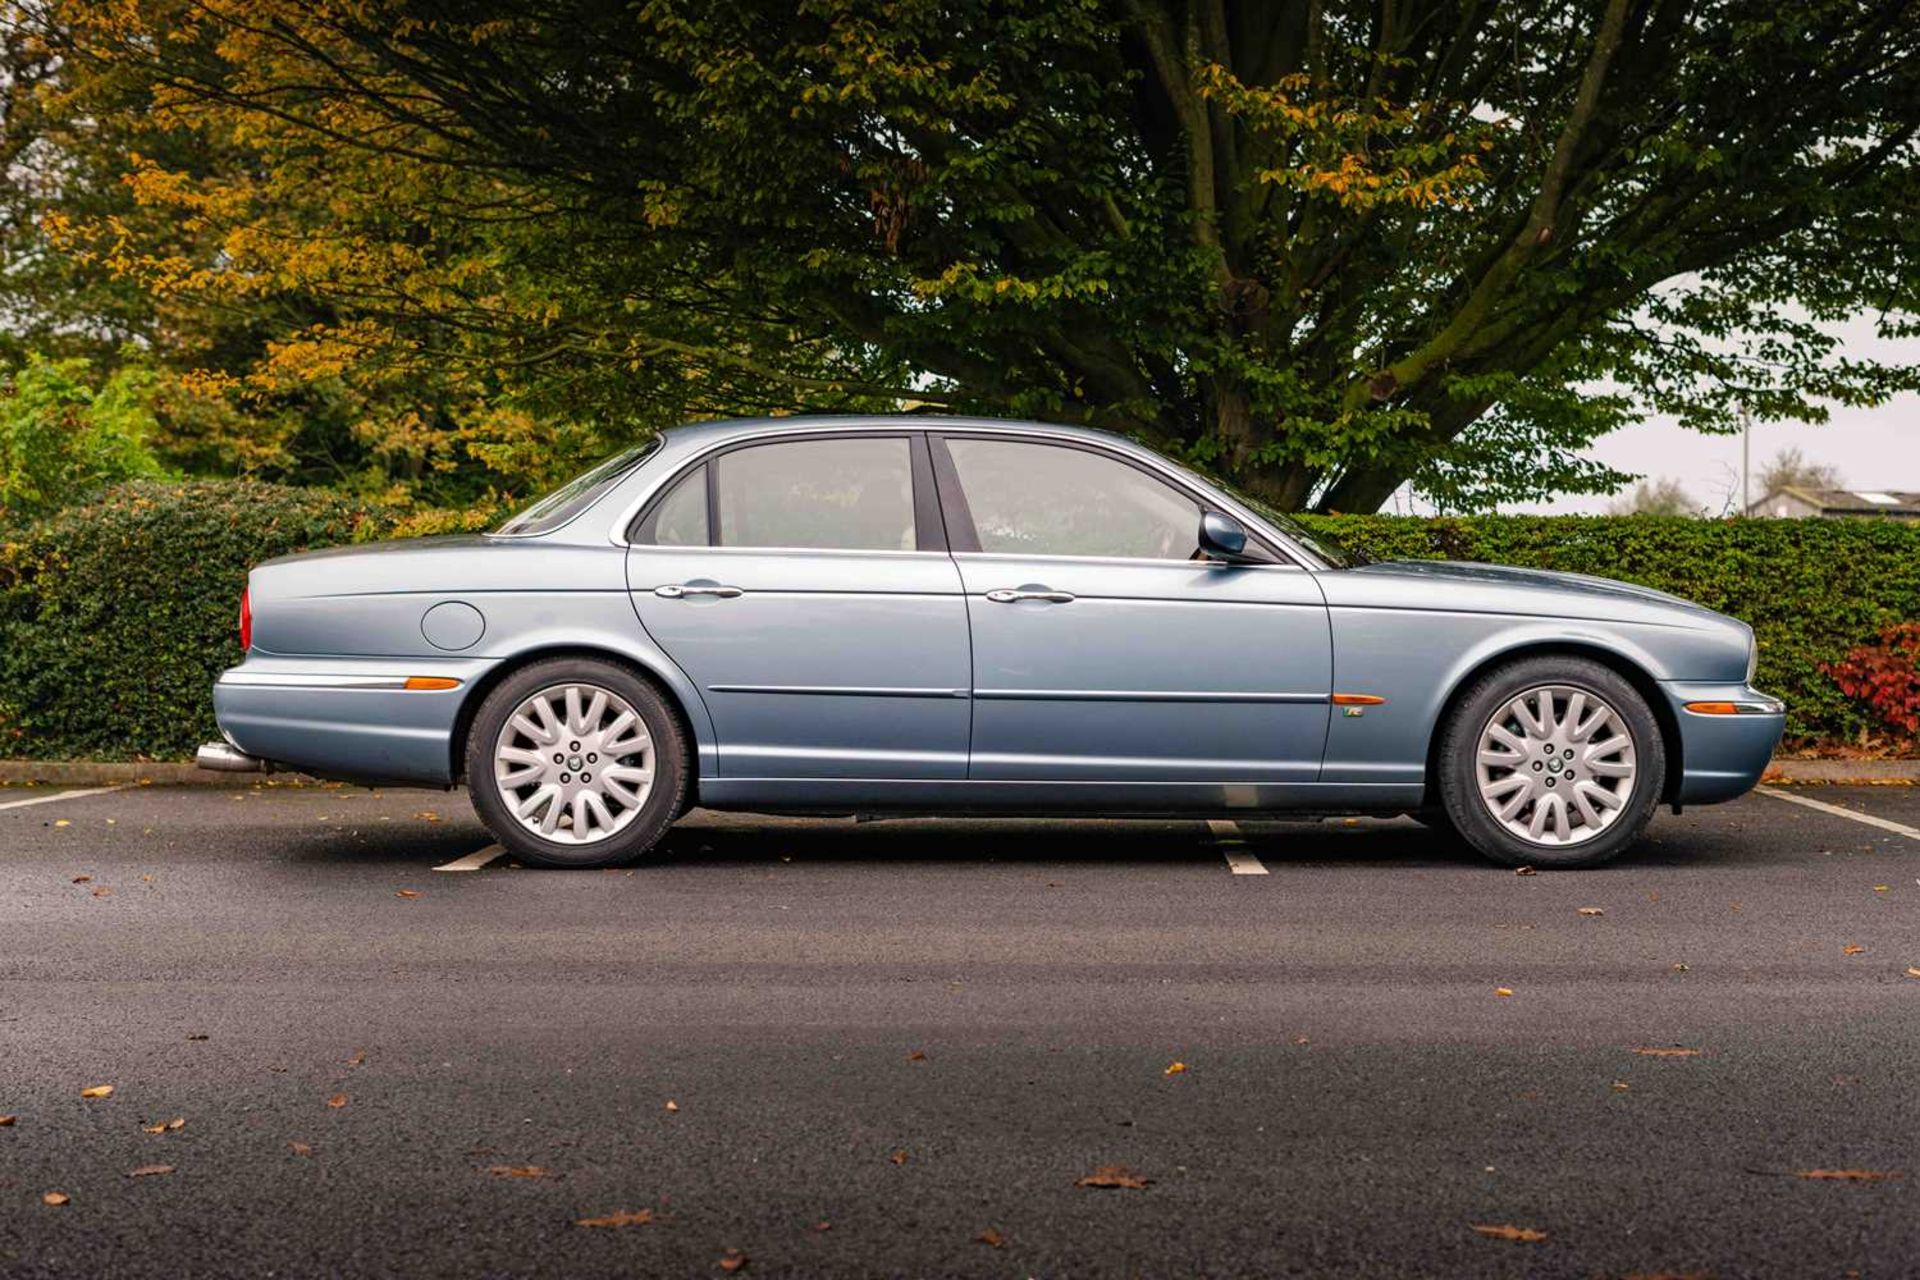 2003 Jaguar XJ8 4.2 V8 SE Range-topping 'Special Equipment' model, with a current MOT and warranted  - Image 12 of 124